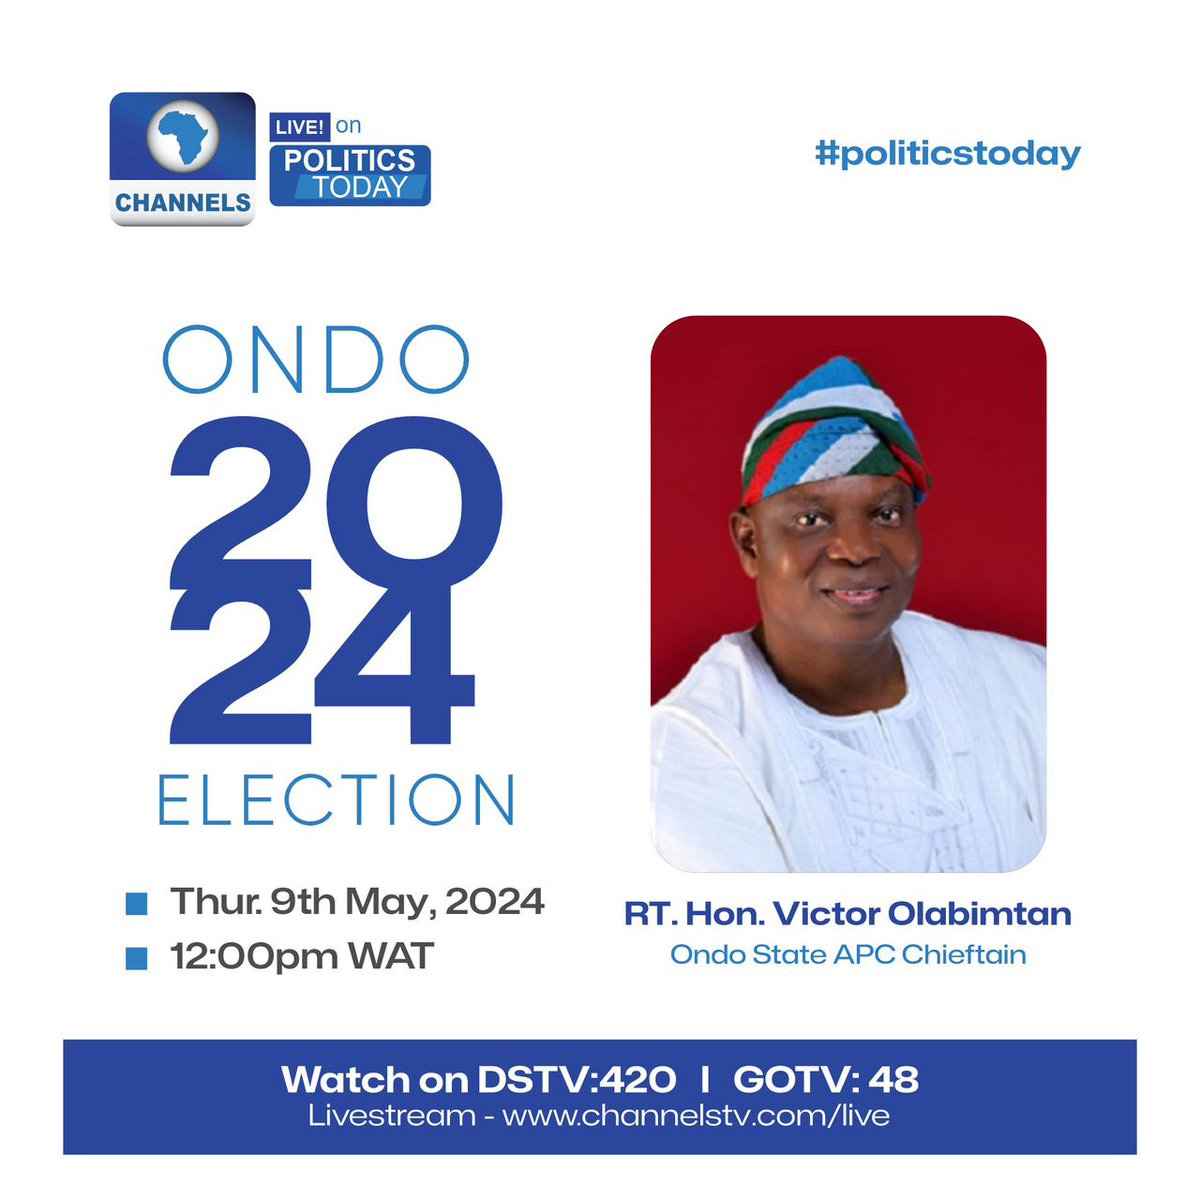 RT. Hon. Victor Olabimtan (Ondo State APC Chieftain) Live interview by 12pm on channel Tv @channelstv
Stay tuned and stay awoke... Its gona be a blast.... 
#OndoIsLucky